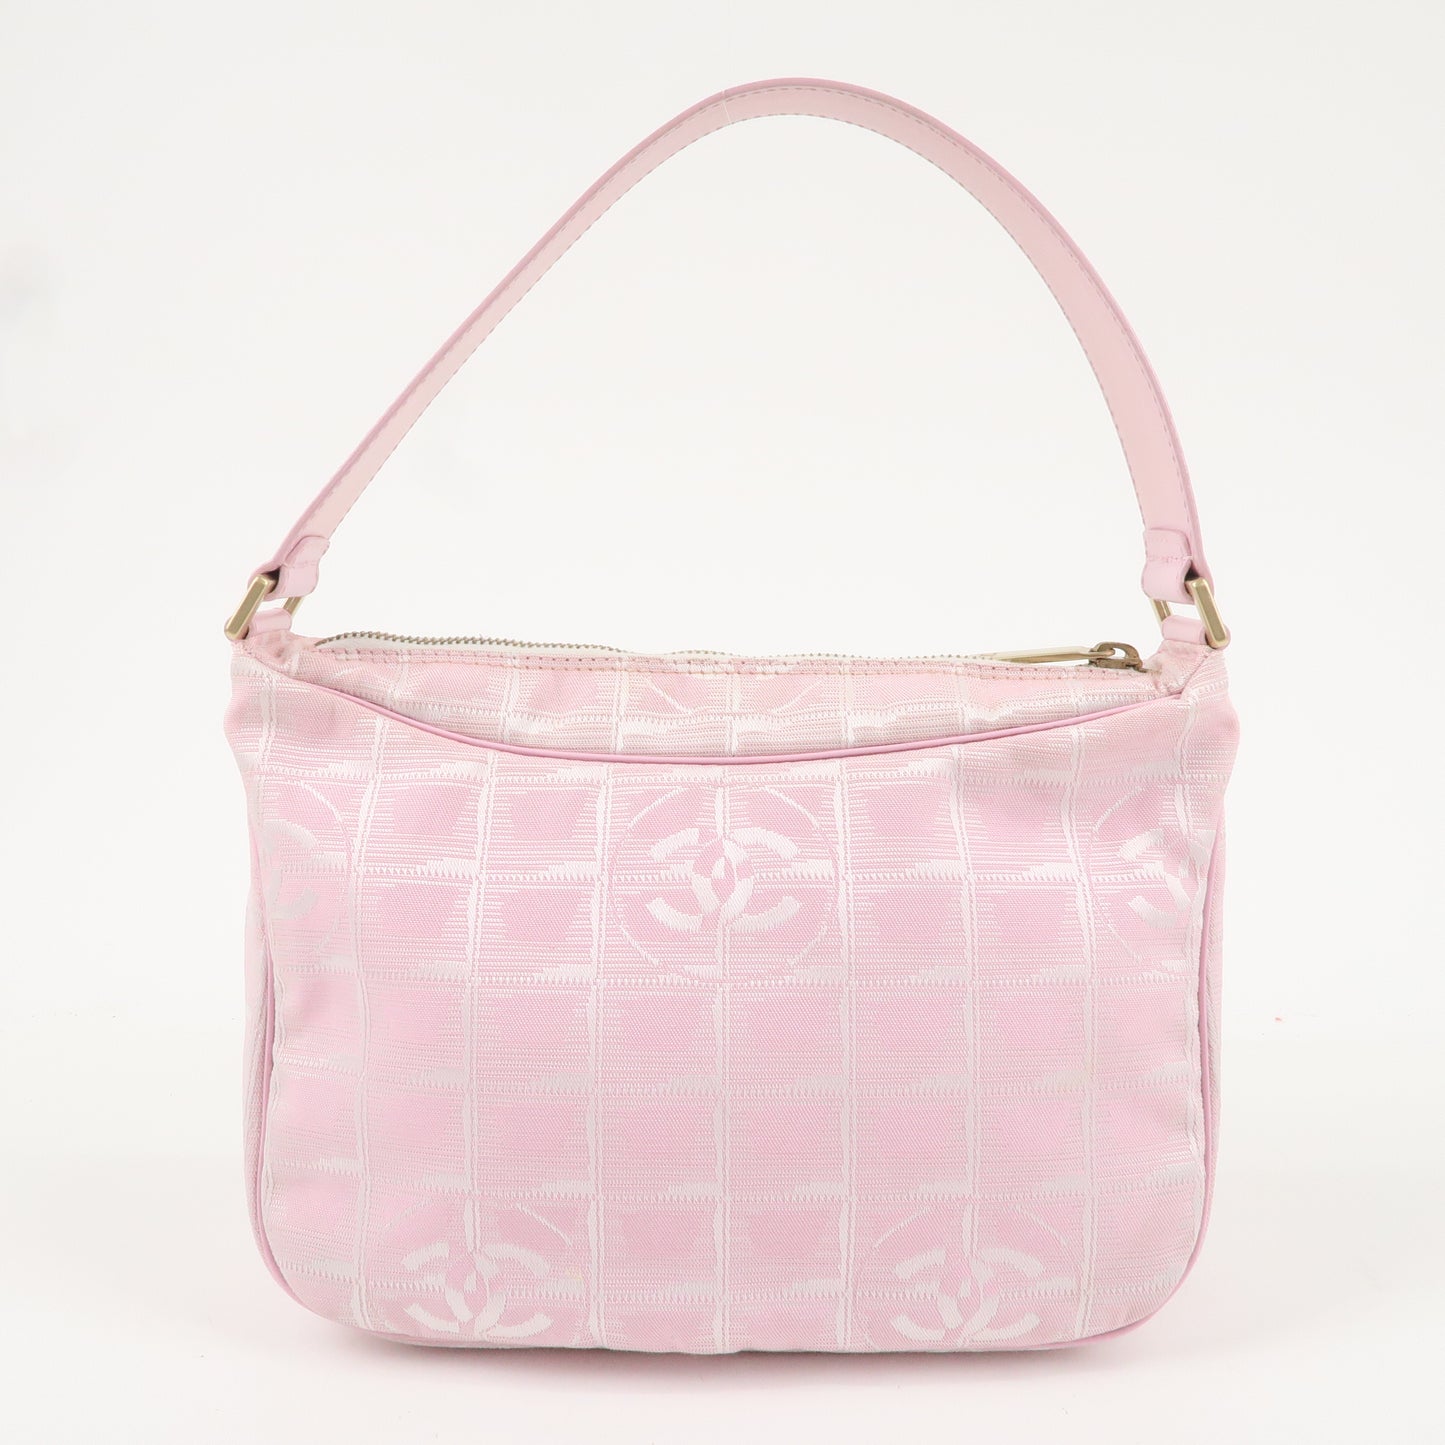 CHANEL New Travel Line Nylon Jacquard Leather Hand Bag Pink A20516